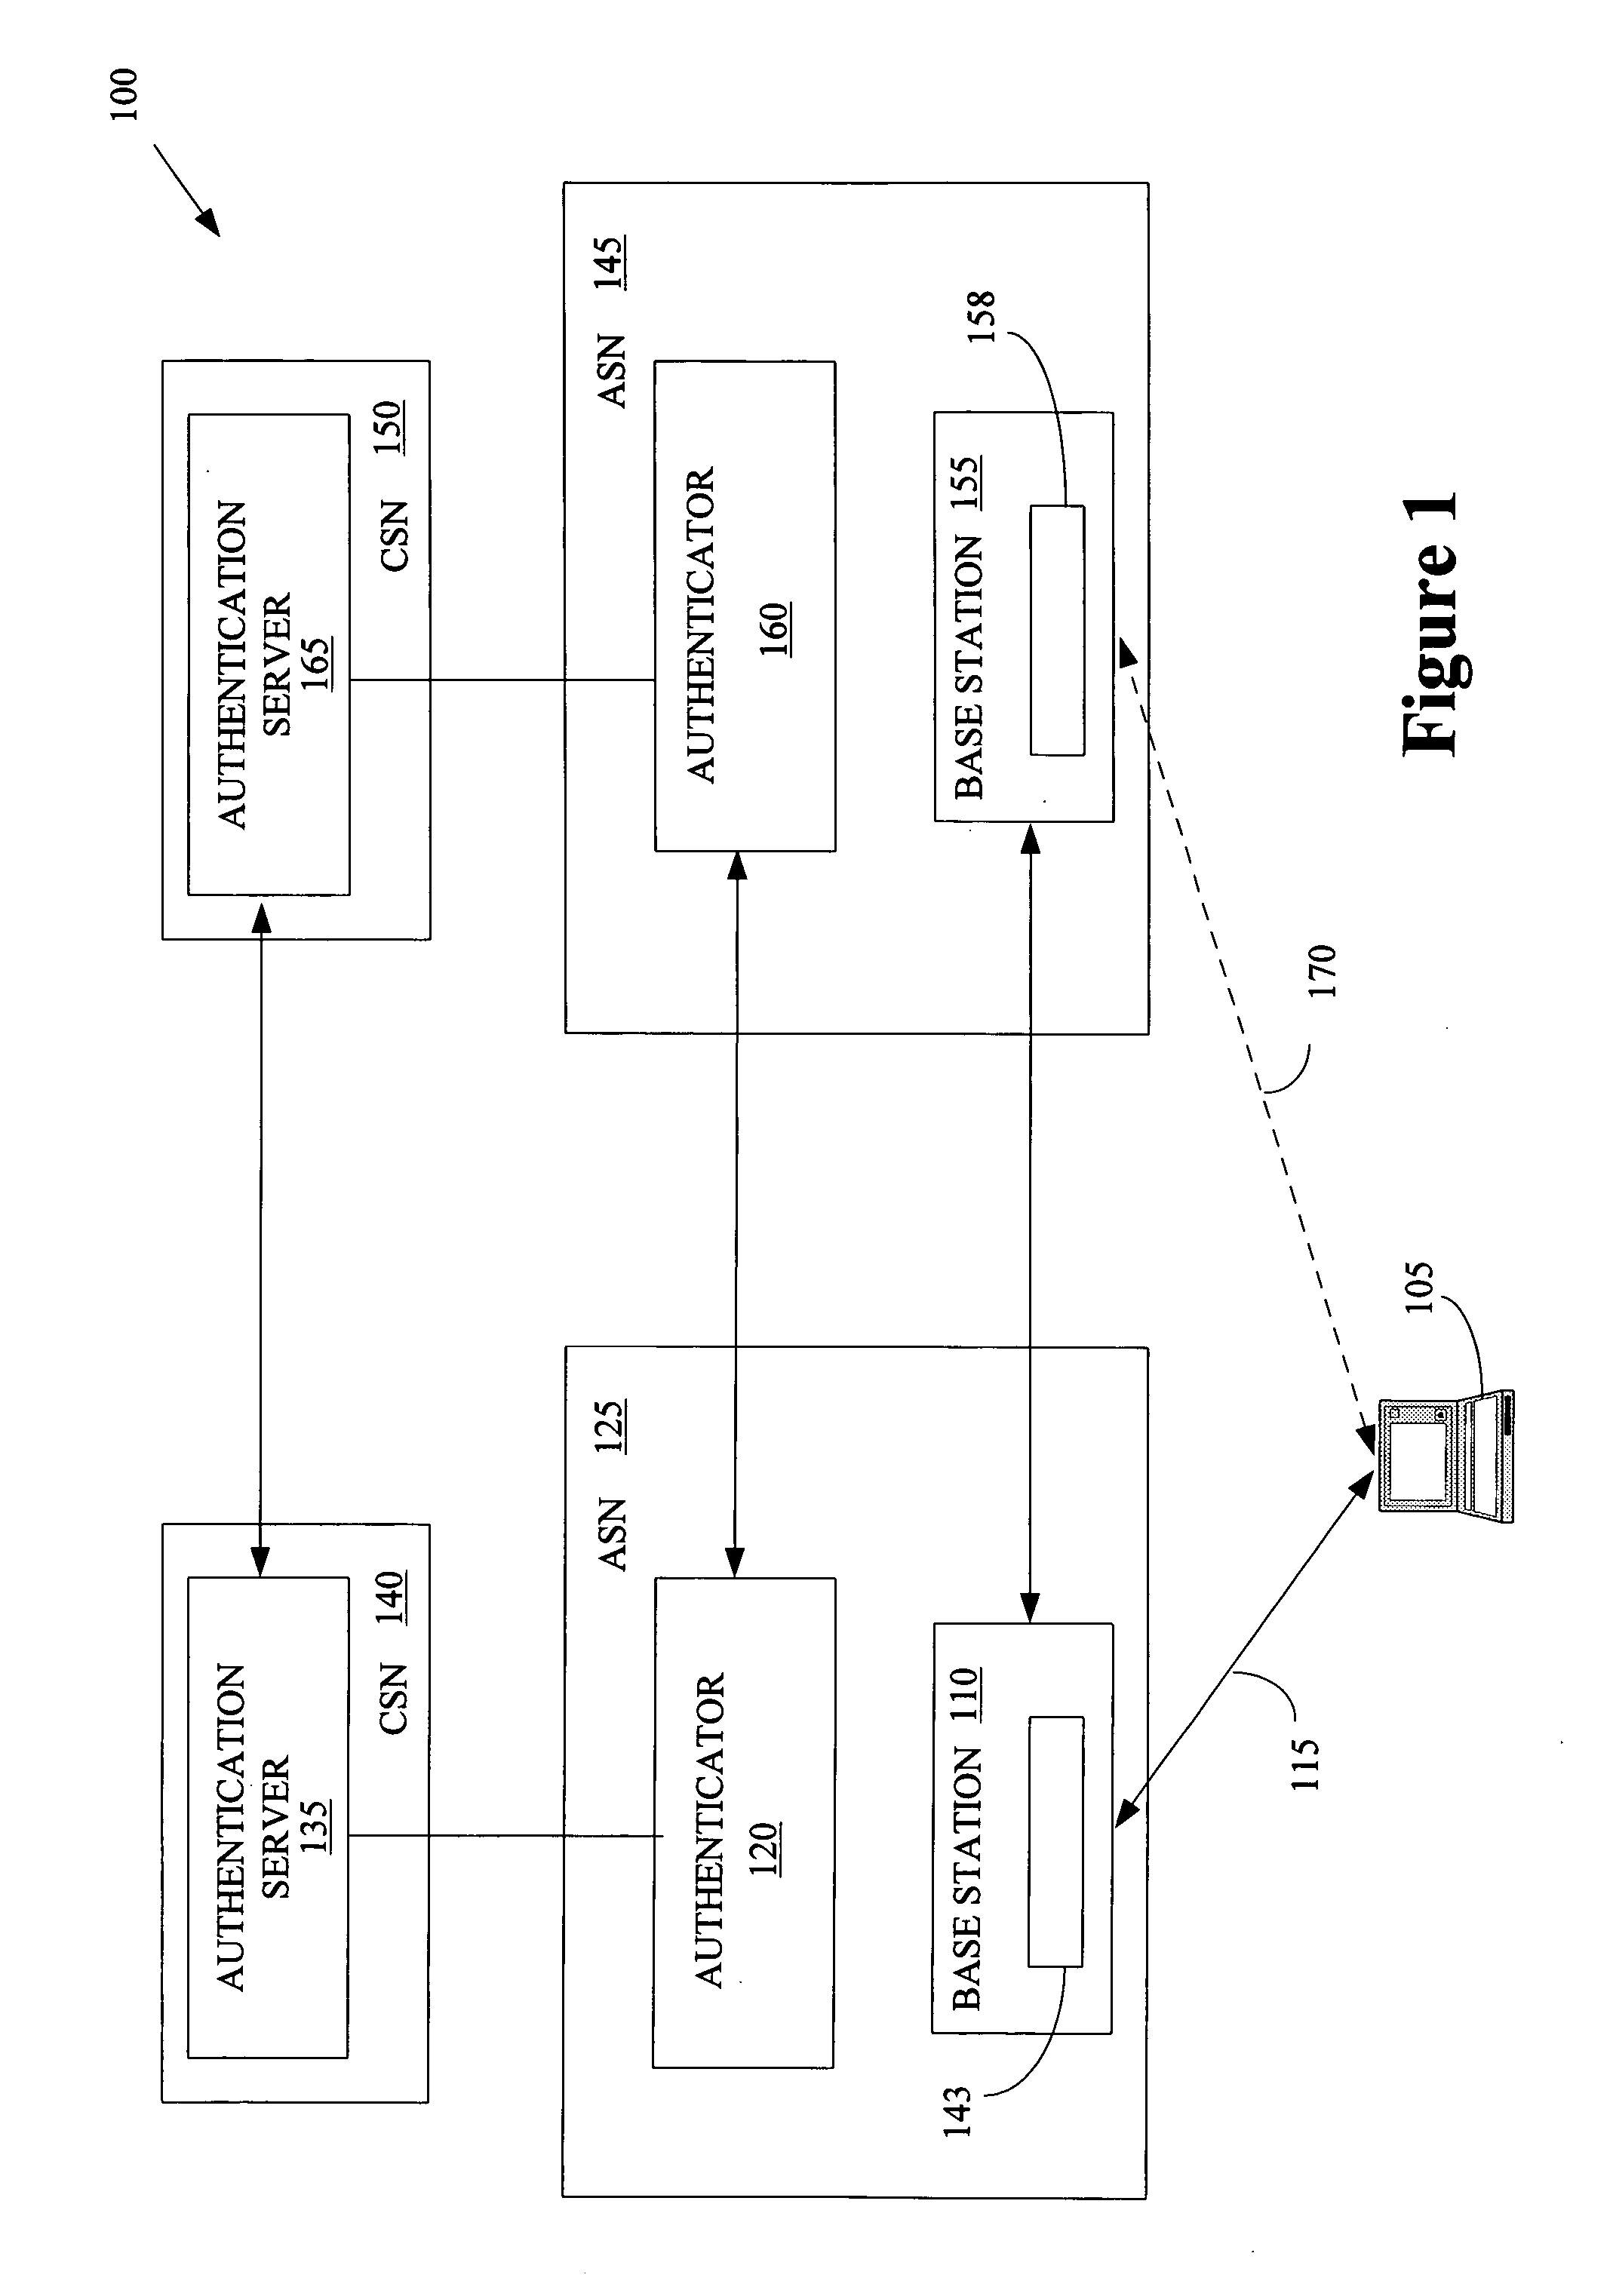 Method for distributing security keys during hand-off in a wireless communication system